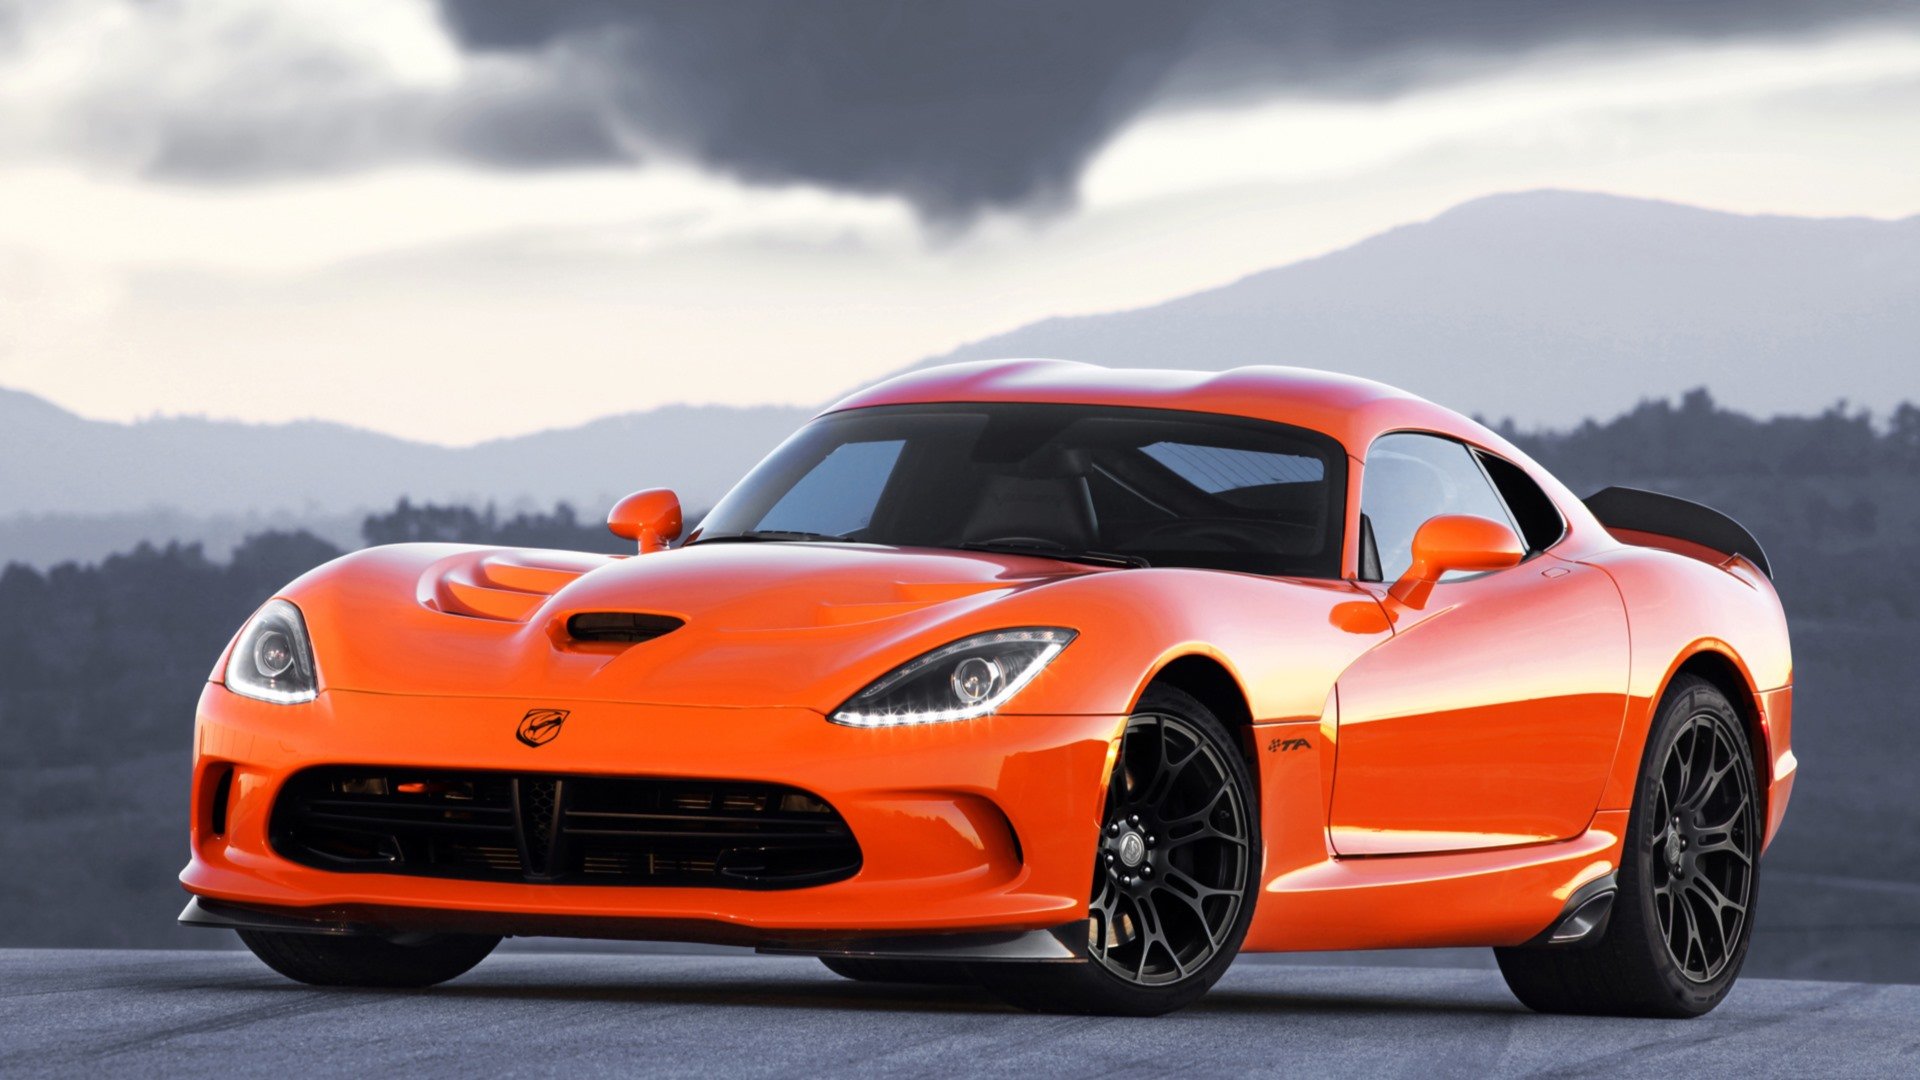 Best Dodge Viper background ID:8361 for High Resolution hd 1080p computer